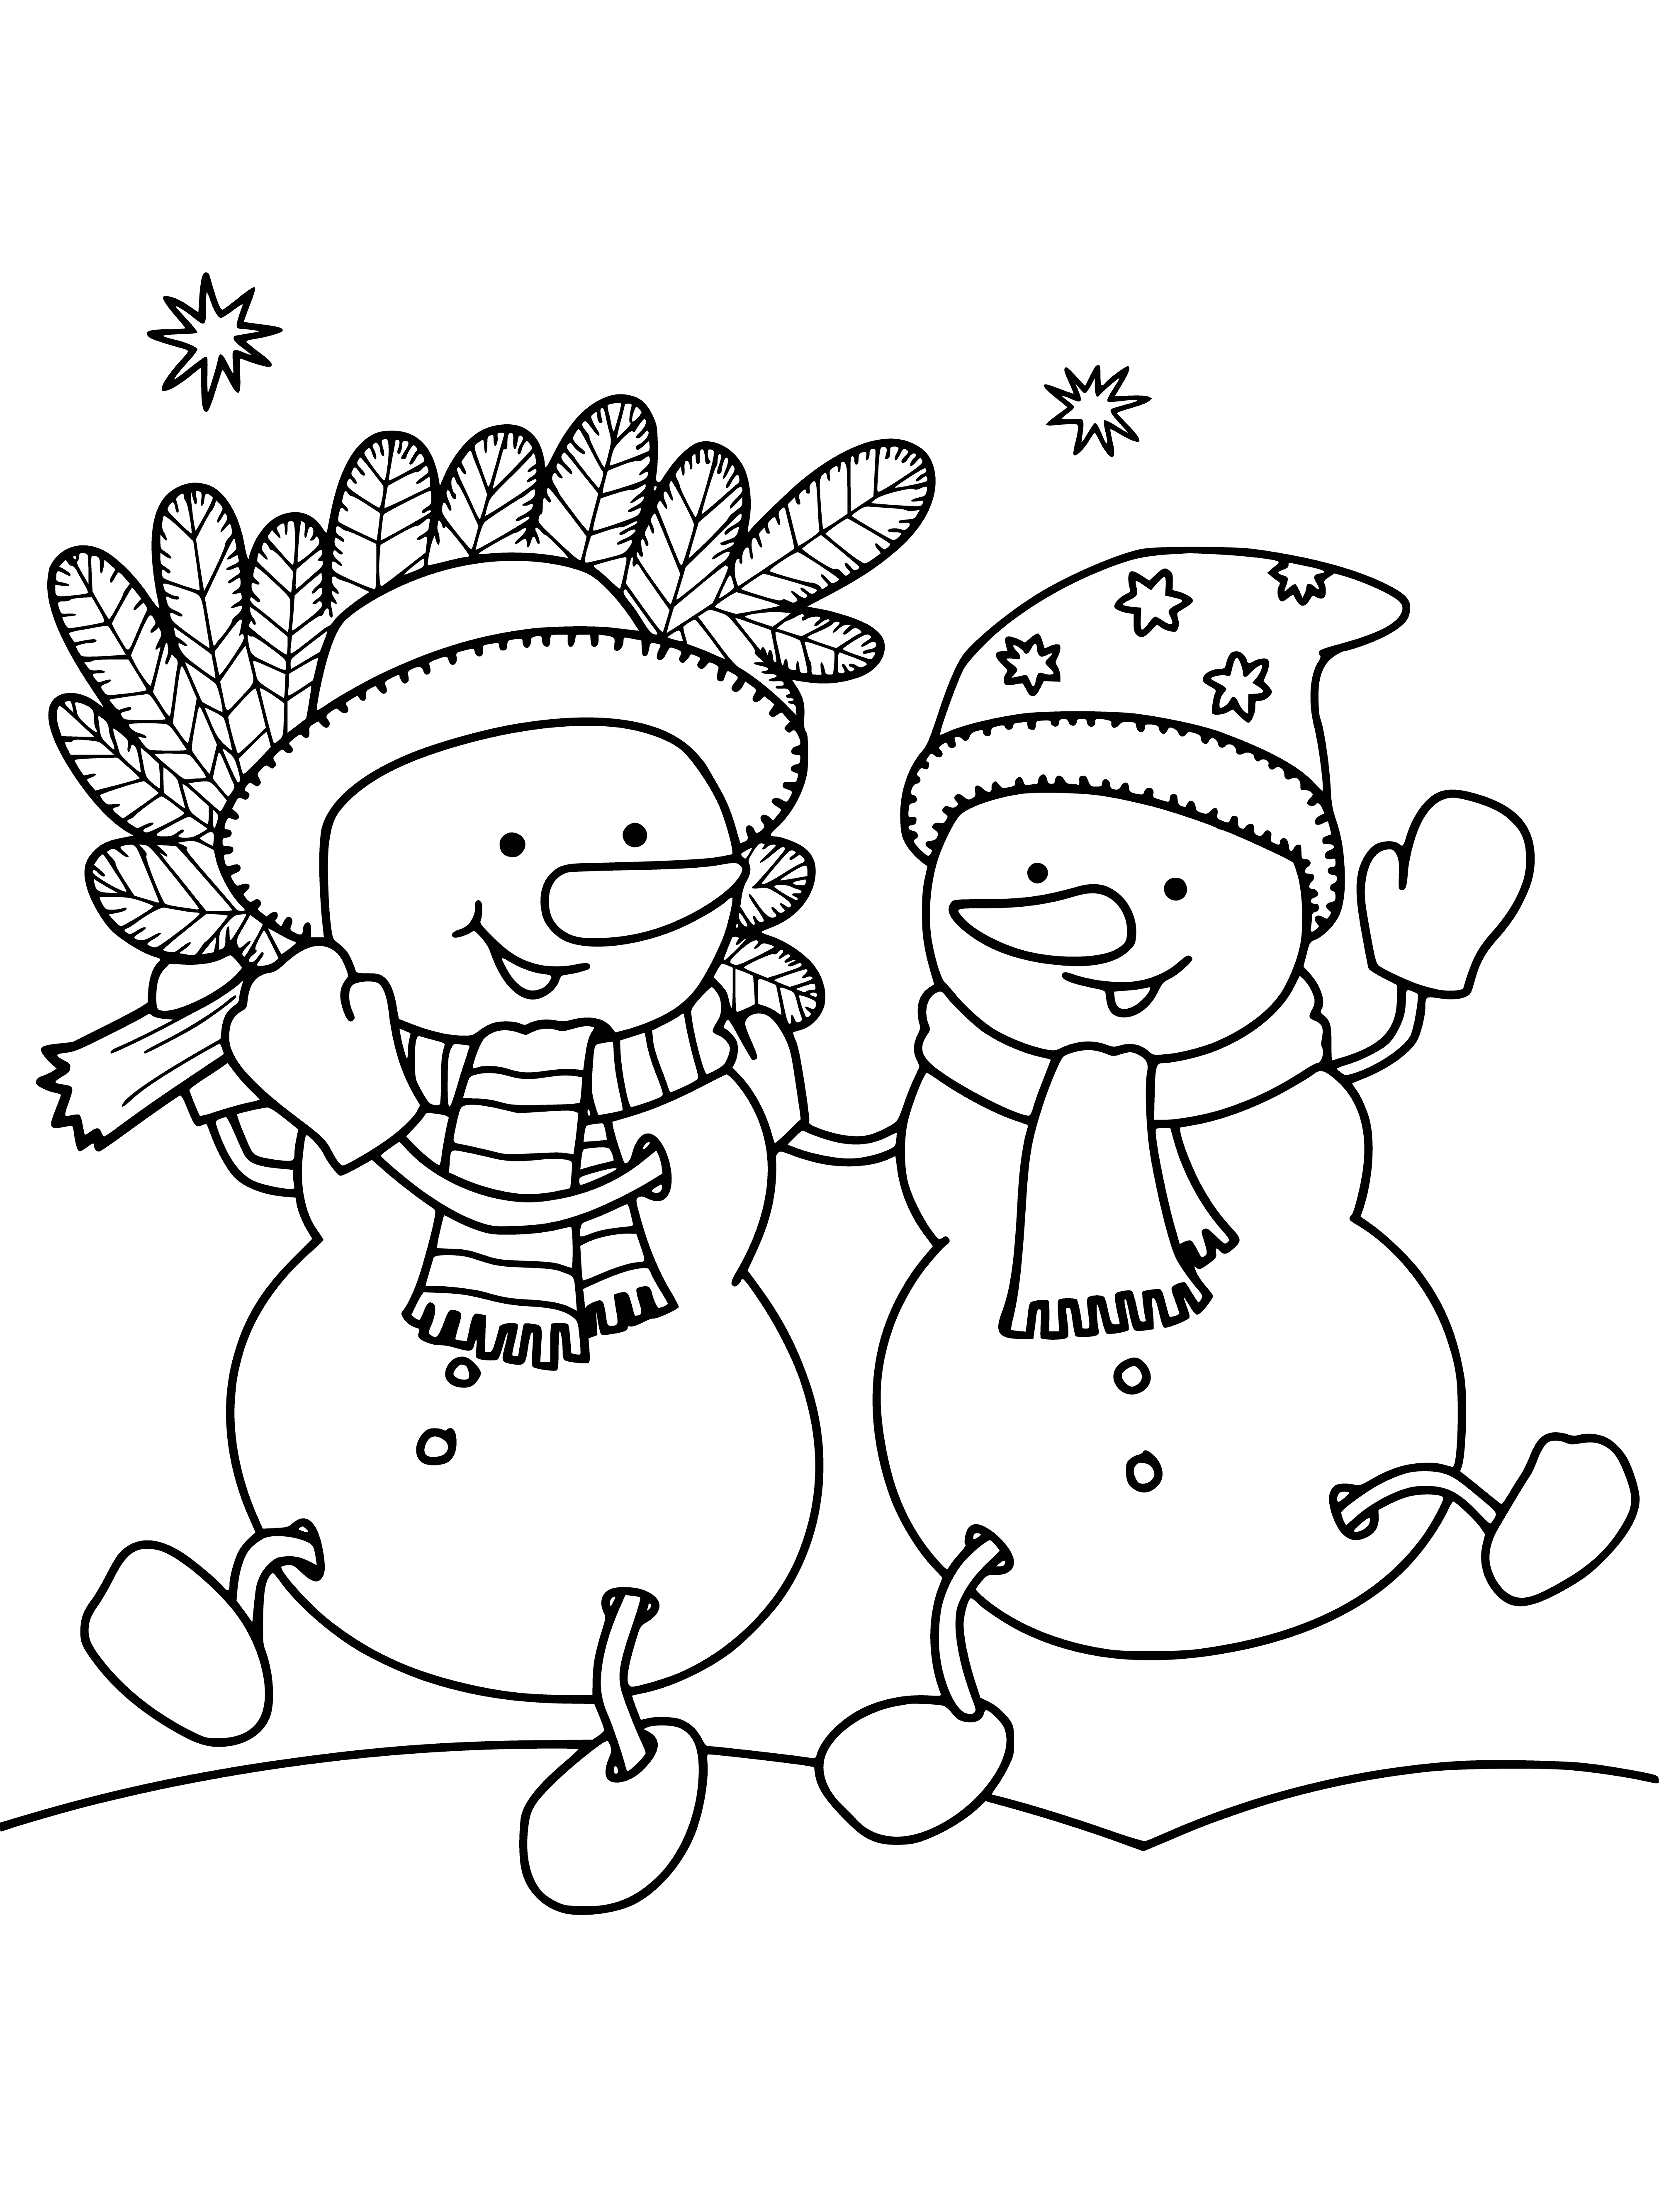 coloring page: Snowmen of different sizes made w/ coals for eyes & carrot nose, plus sticks for arms. Have hats & scarves, w/ snowballs as pets.